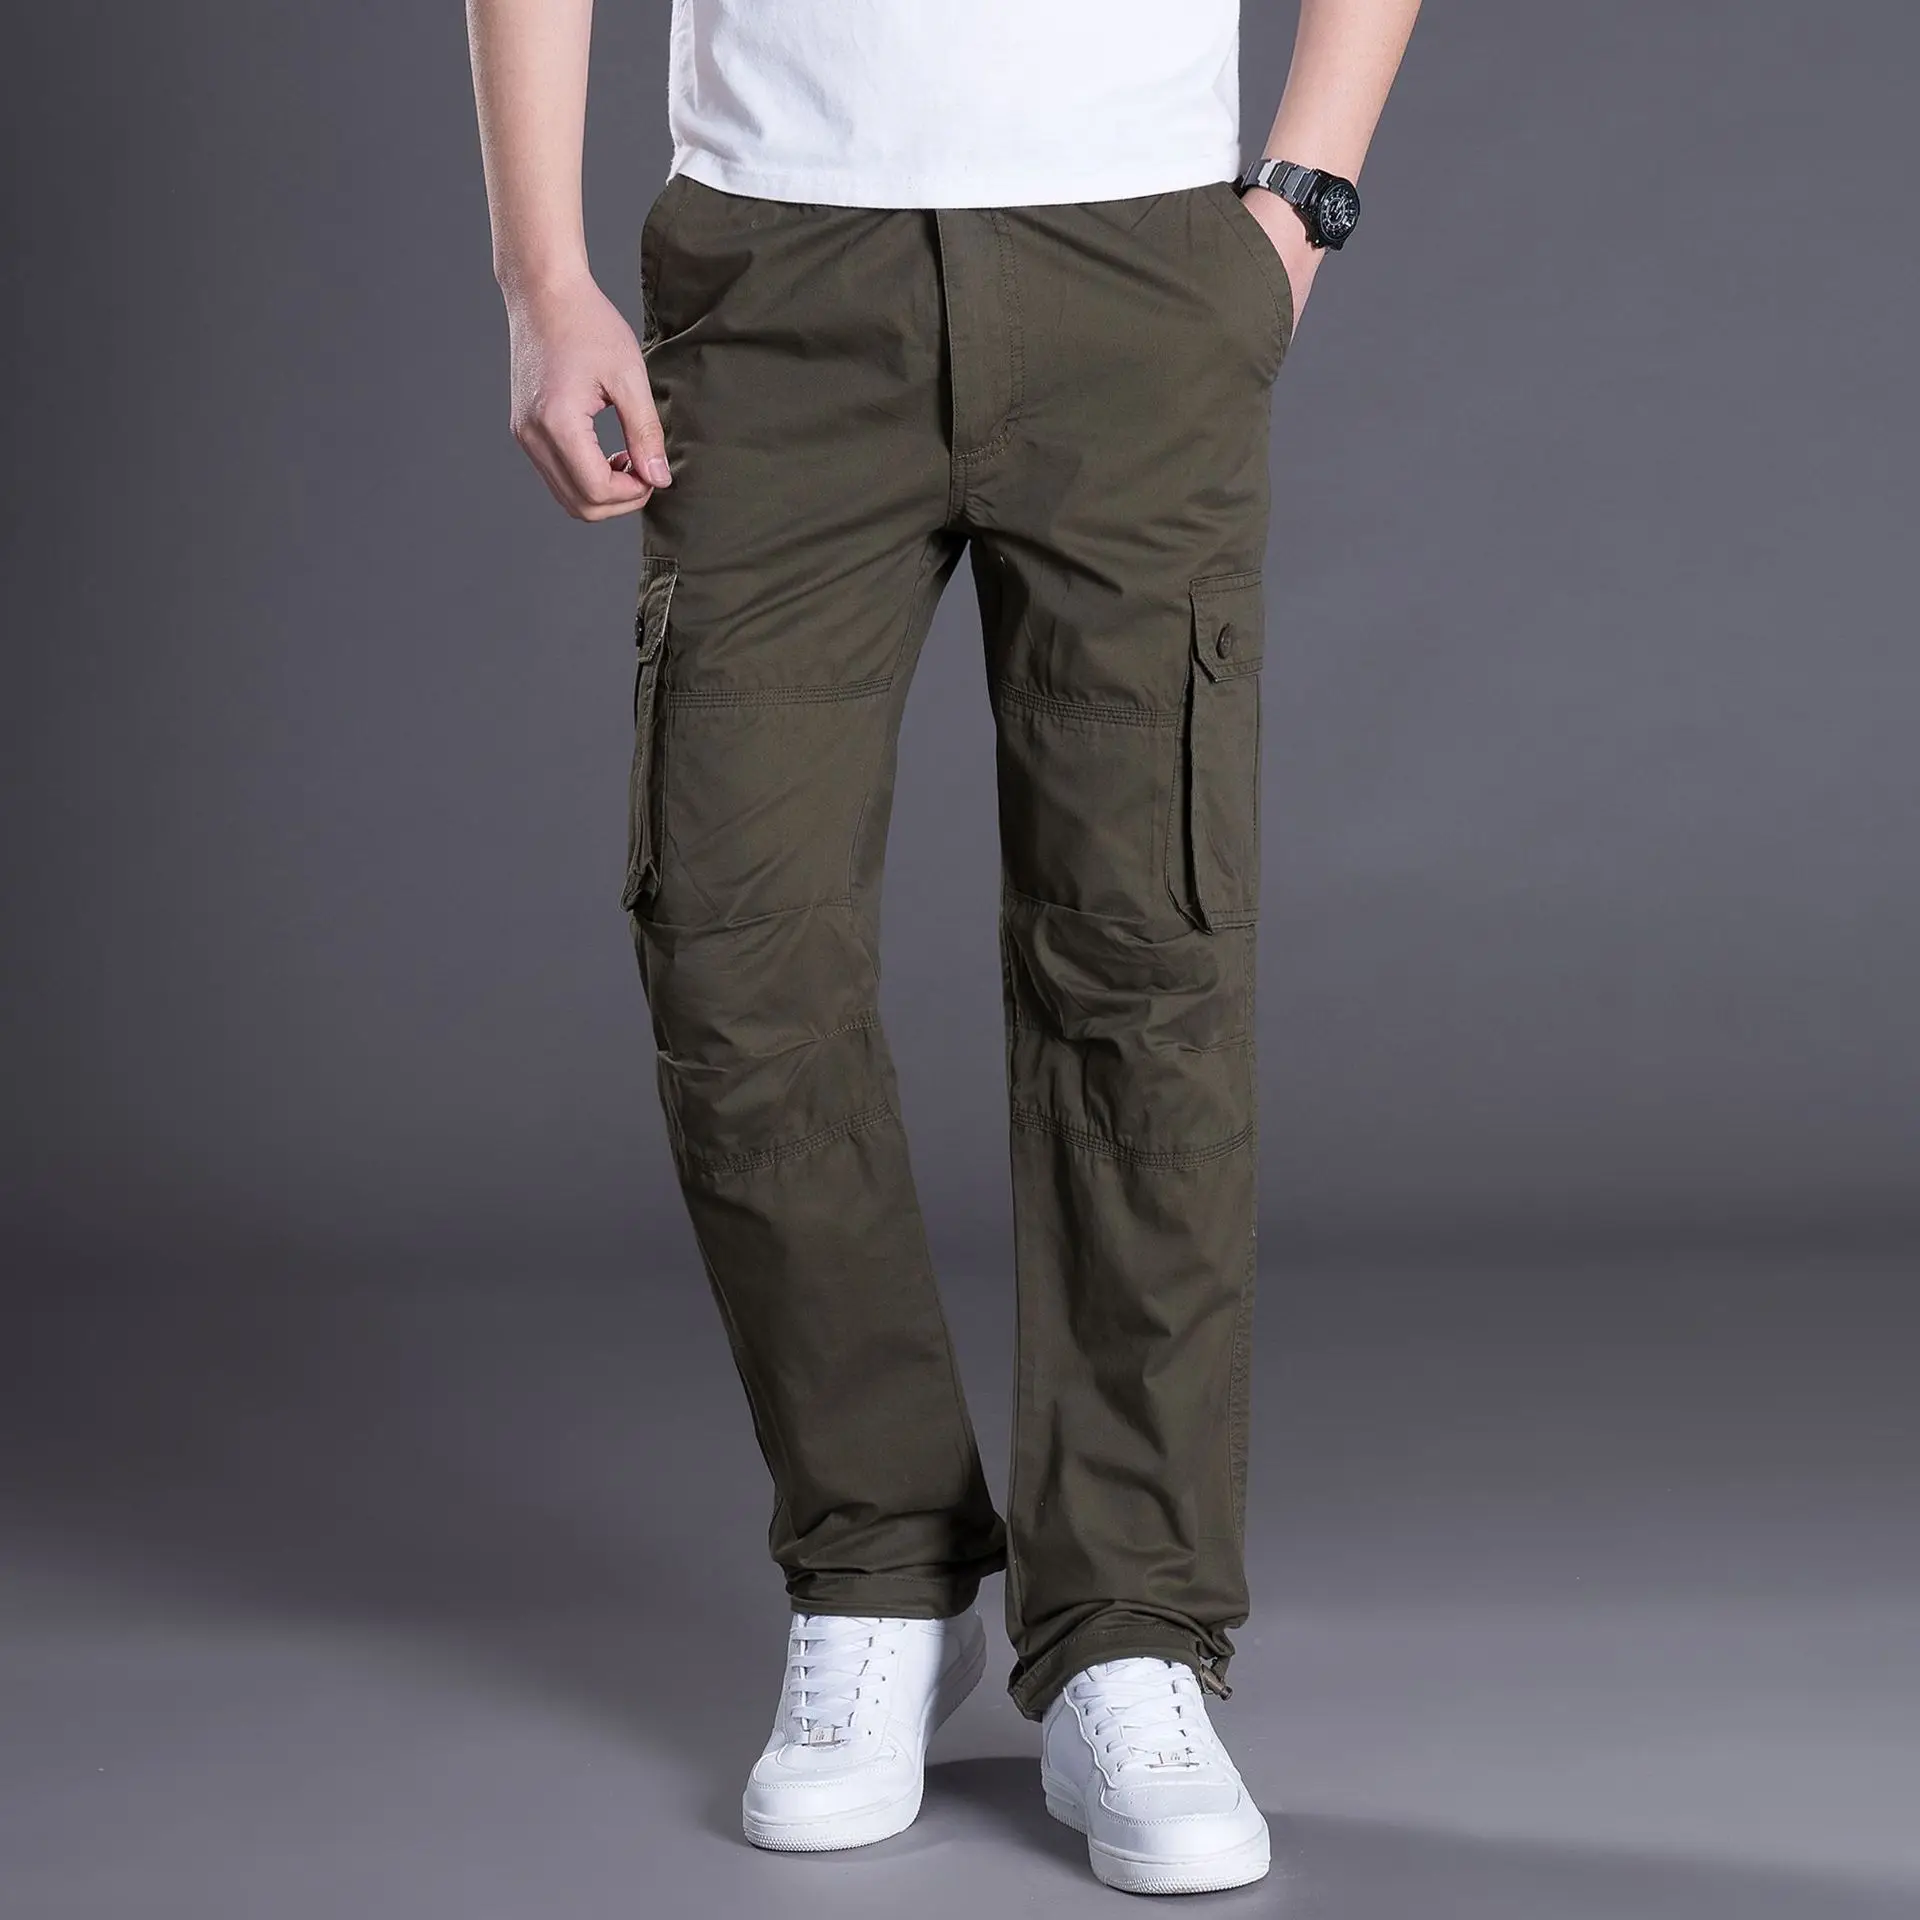 Men's Cargo Pants Mens Casual Multi Pockets Military Large Size Tactical Pants Men Outwear Army Straight Winter Pants Trousers 4